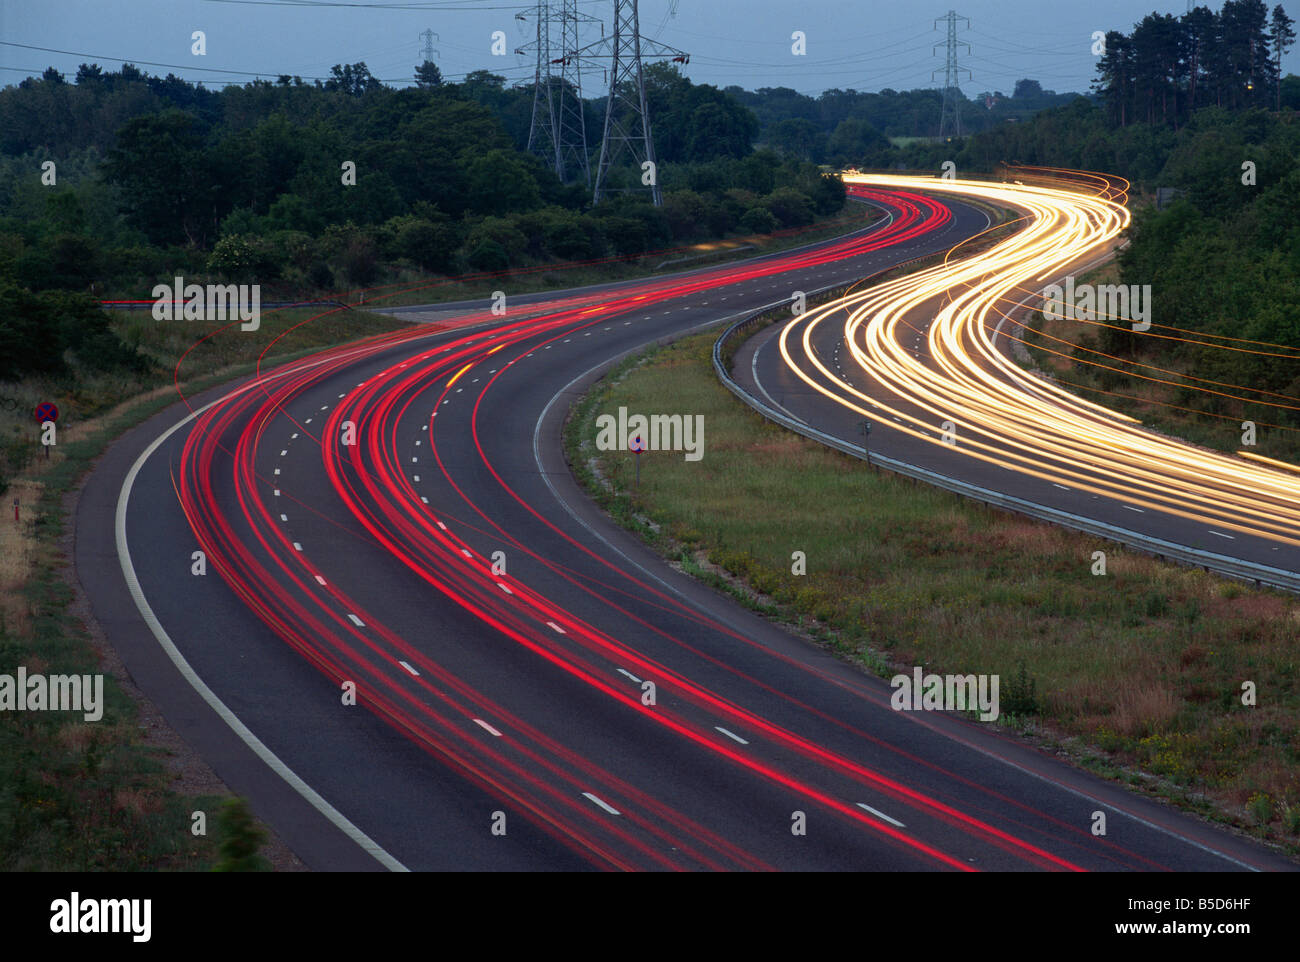 Light trails on the Guildford by pass at dusk in Surrey England R Rainford Stock Photo